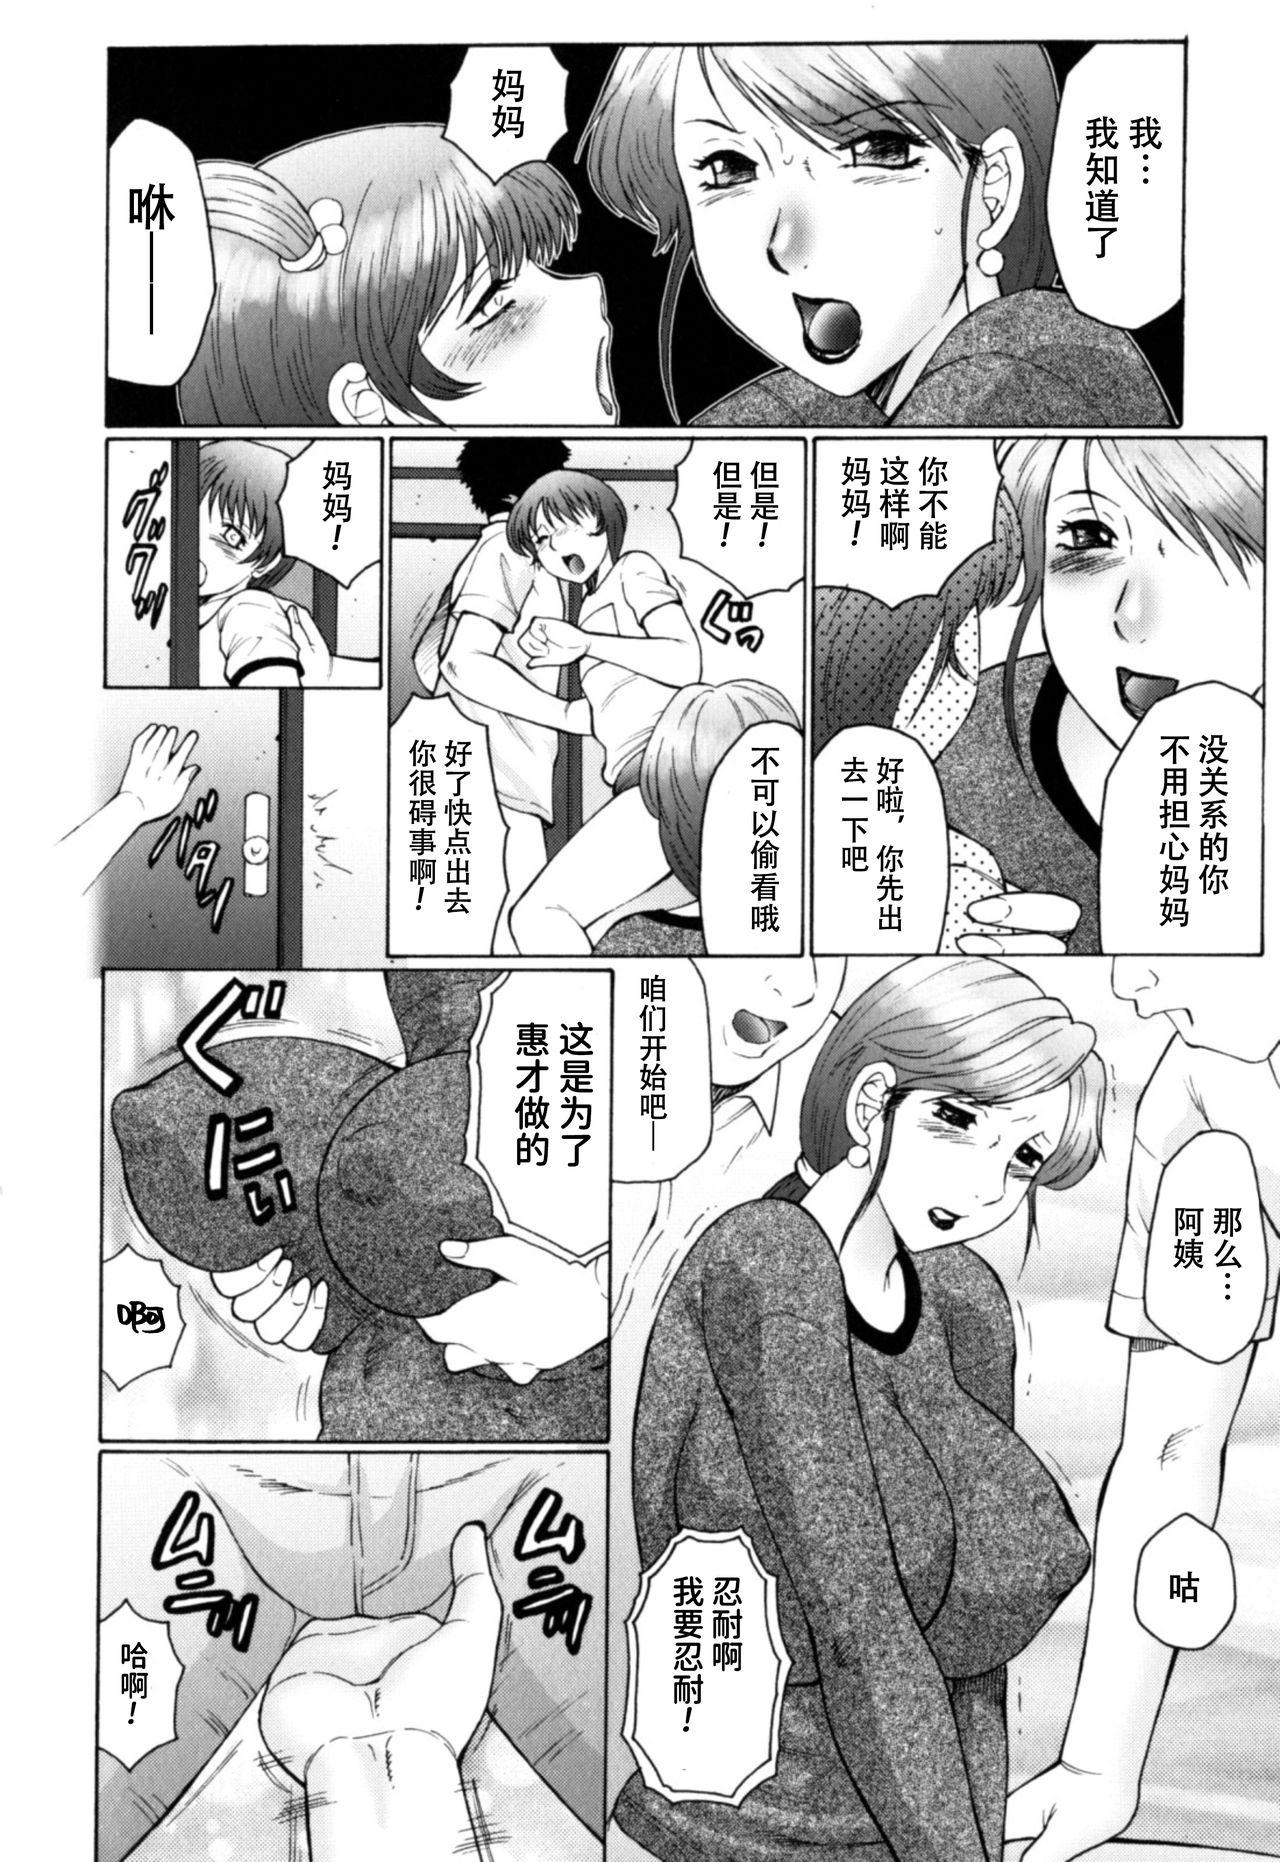 Vip [Fuusen Club] Haha Mamire Ch. 1 [Chinese]【不可视汉化】 Cowgirl - Page 11